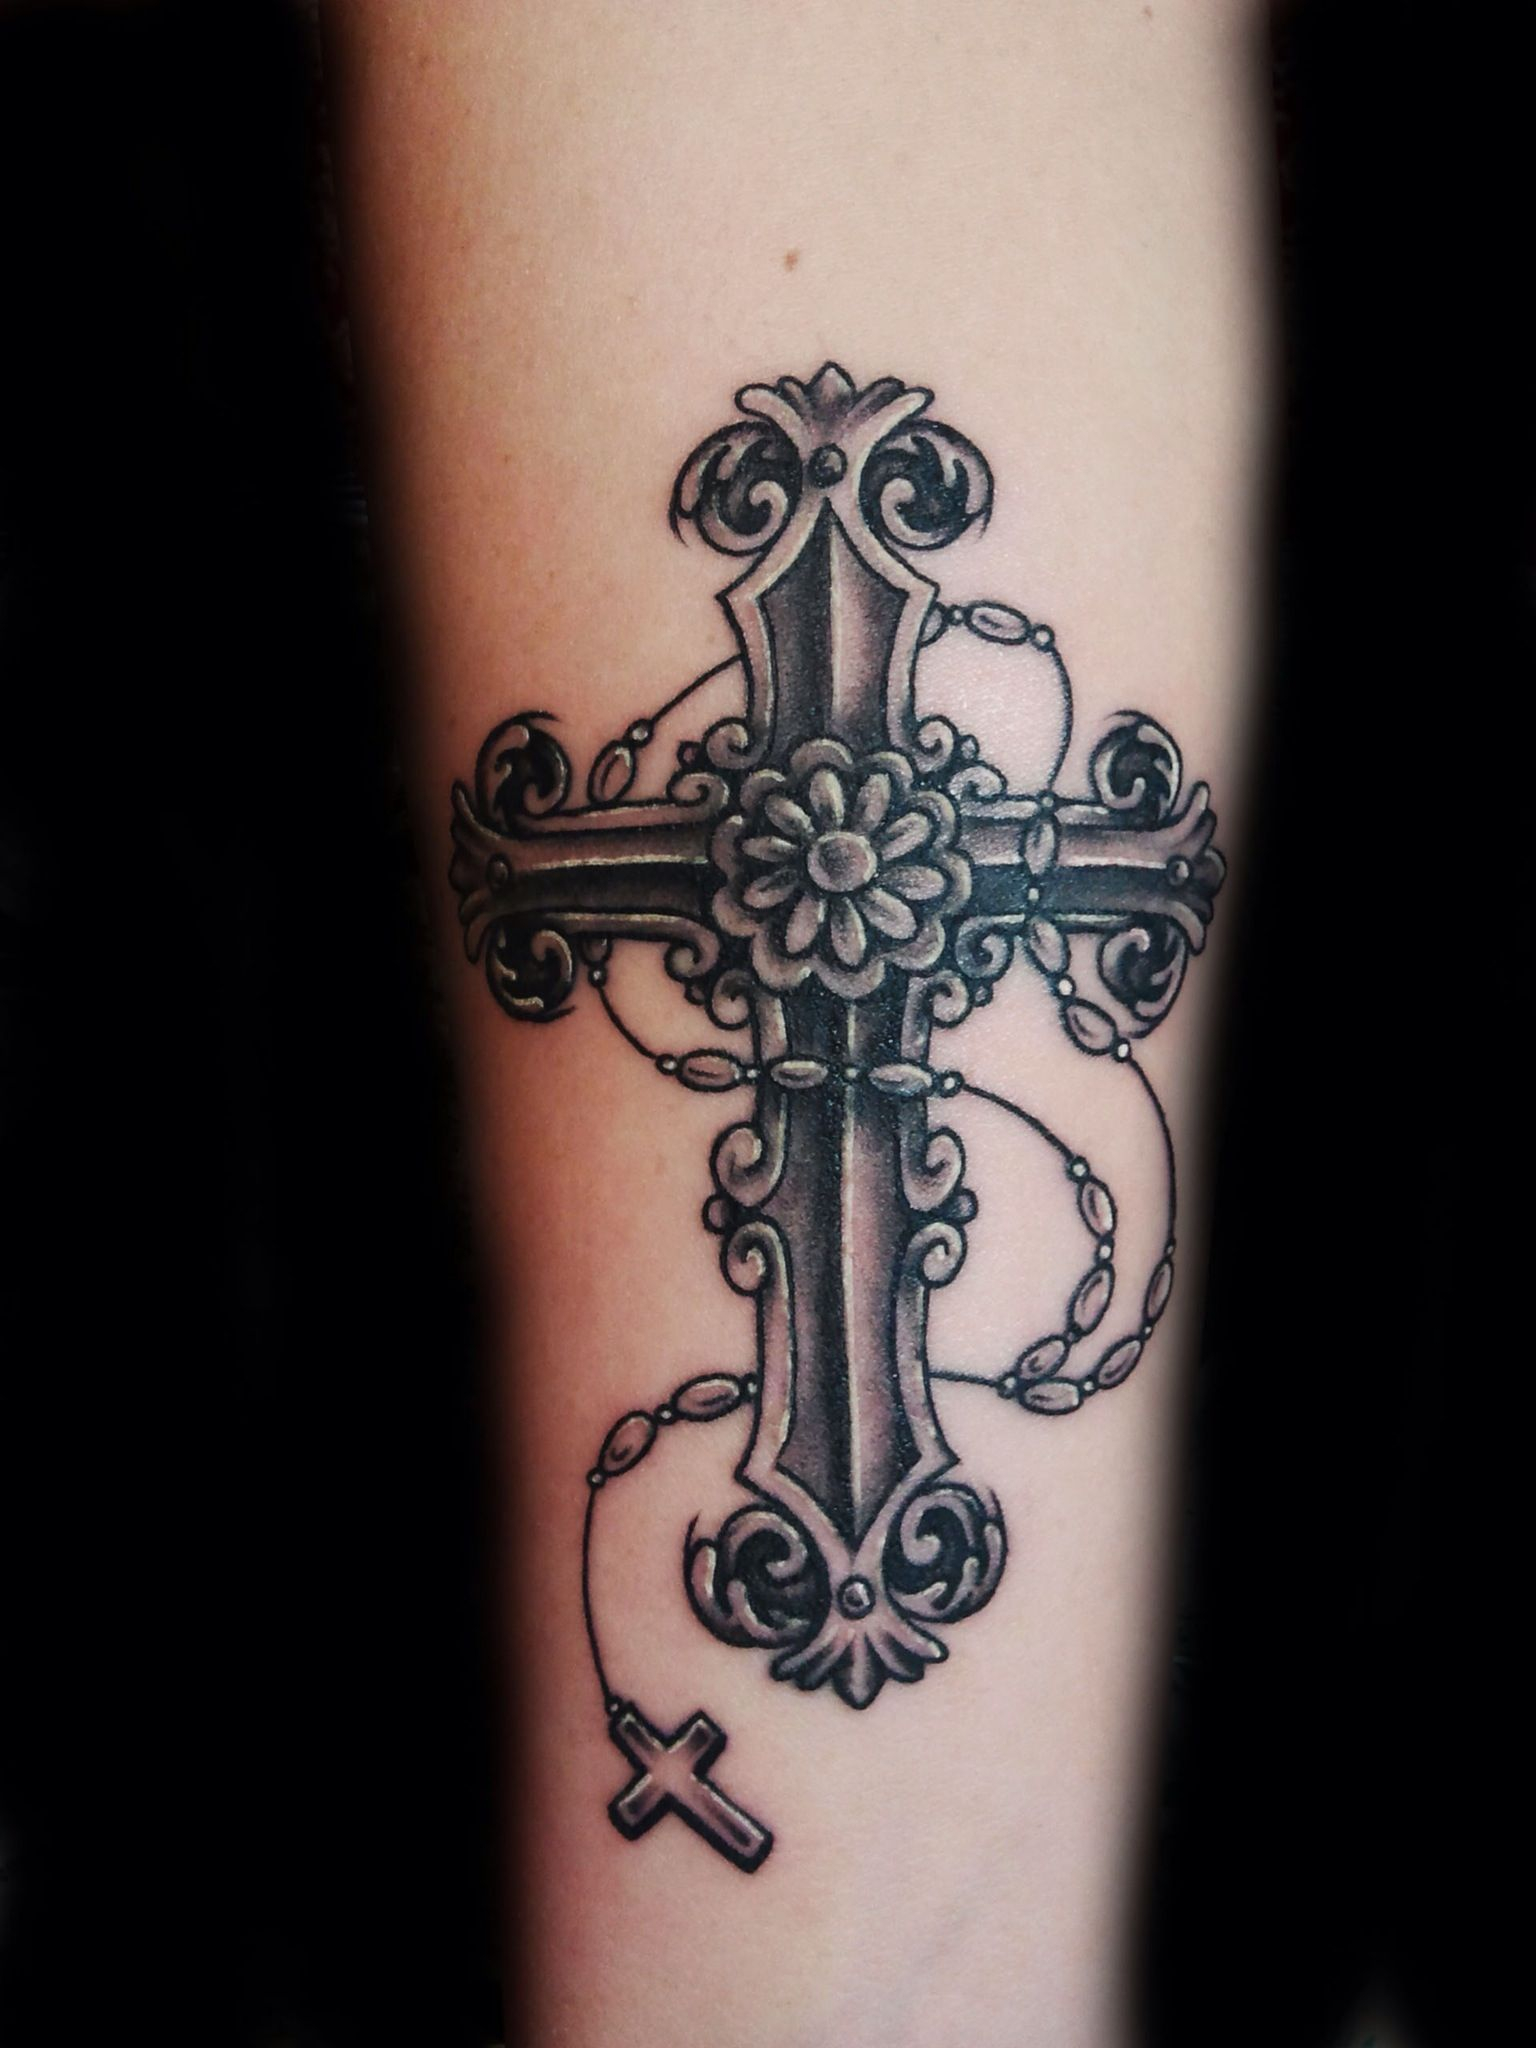 50 Cross Tattoo Ideas To Try For The Love Of Jesus throughout dimensions 1536 X 2048